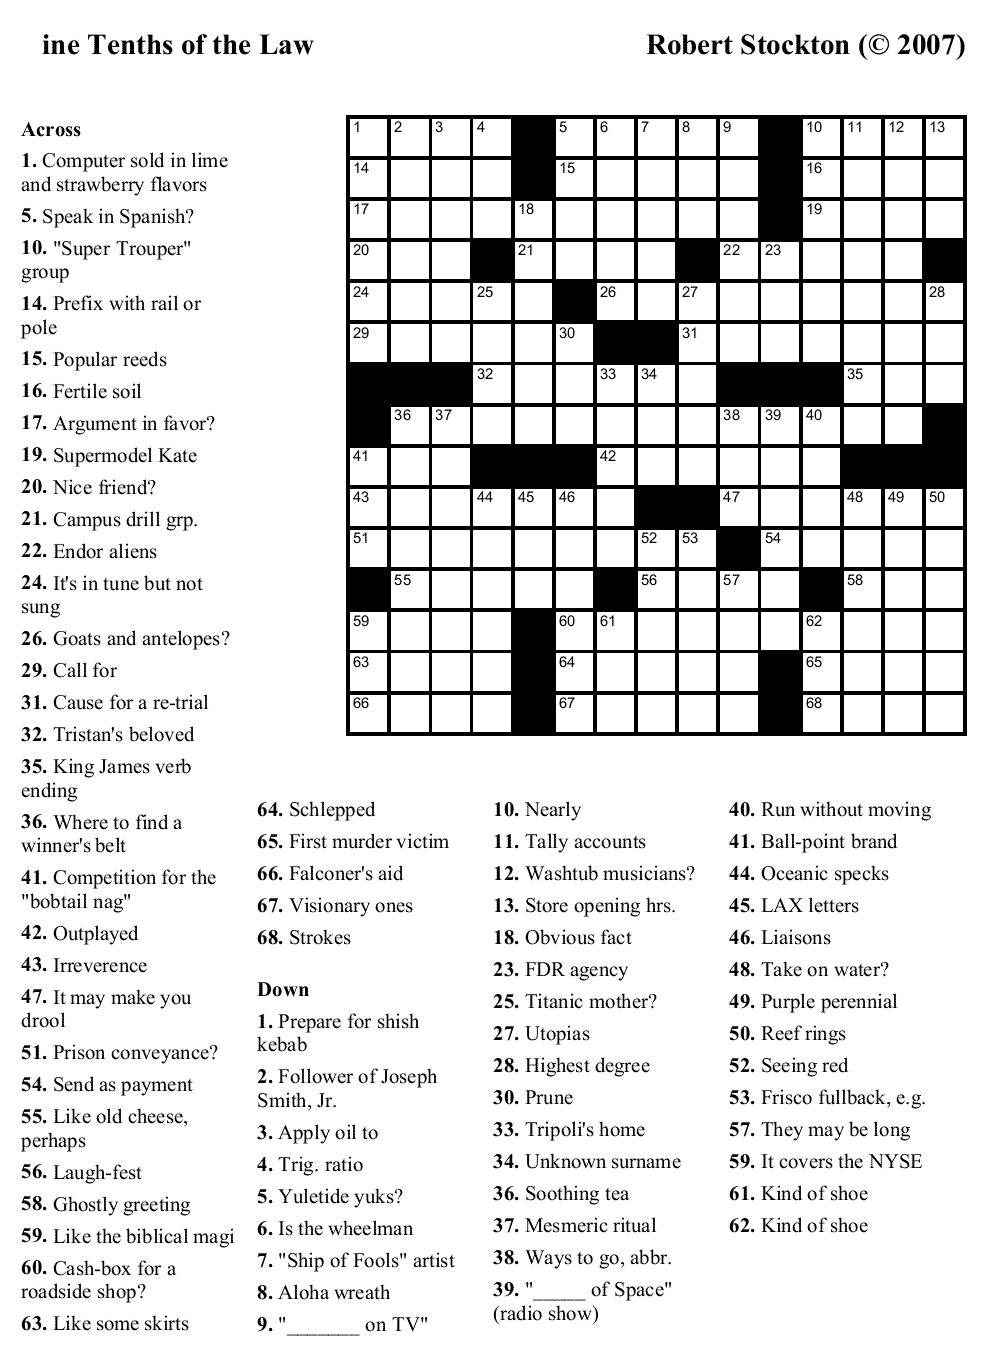 Crossword Puzzles Printable - Yahoo Image Search Results | Crossword - Printable Sports Crossword Puzzles For Adults